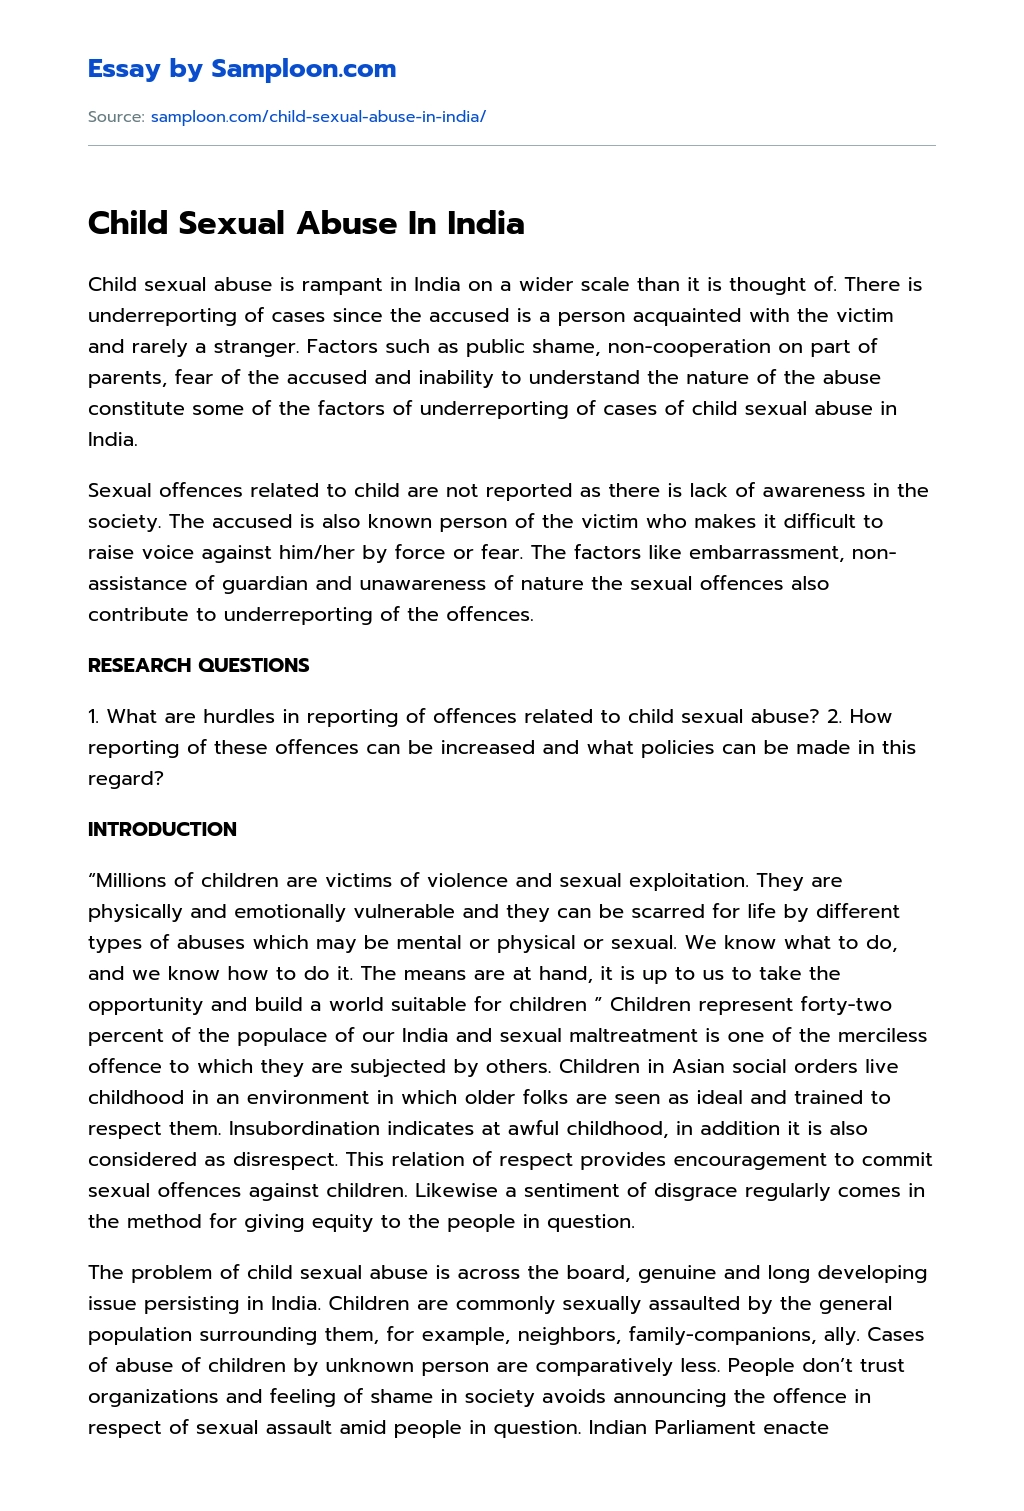 Child Sexual Abuse In India essay